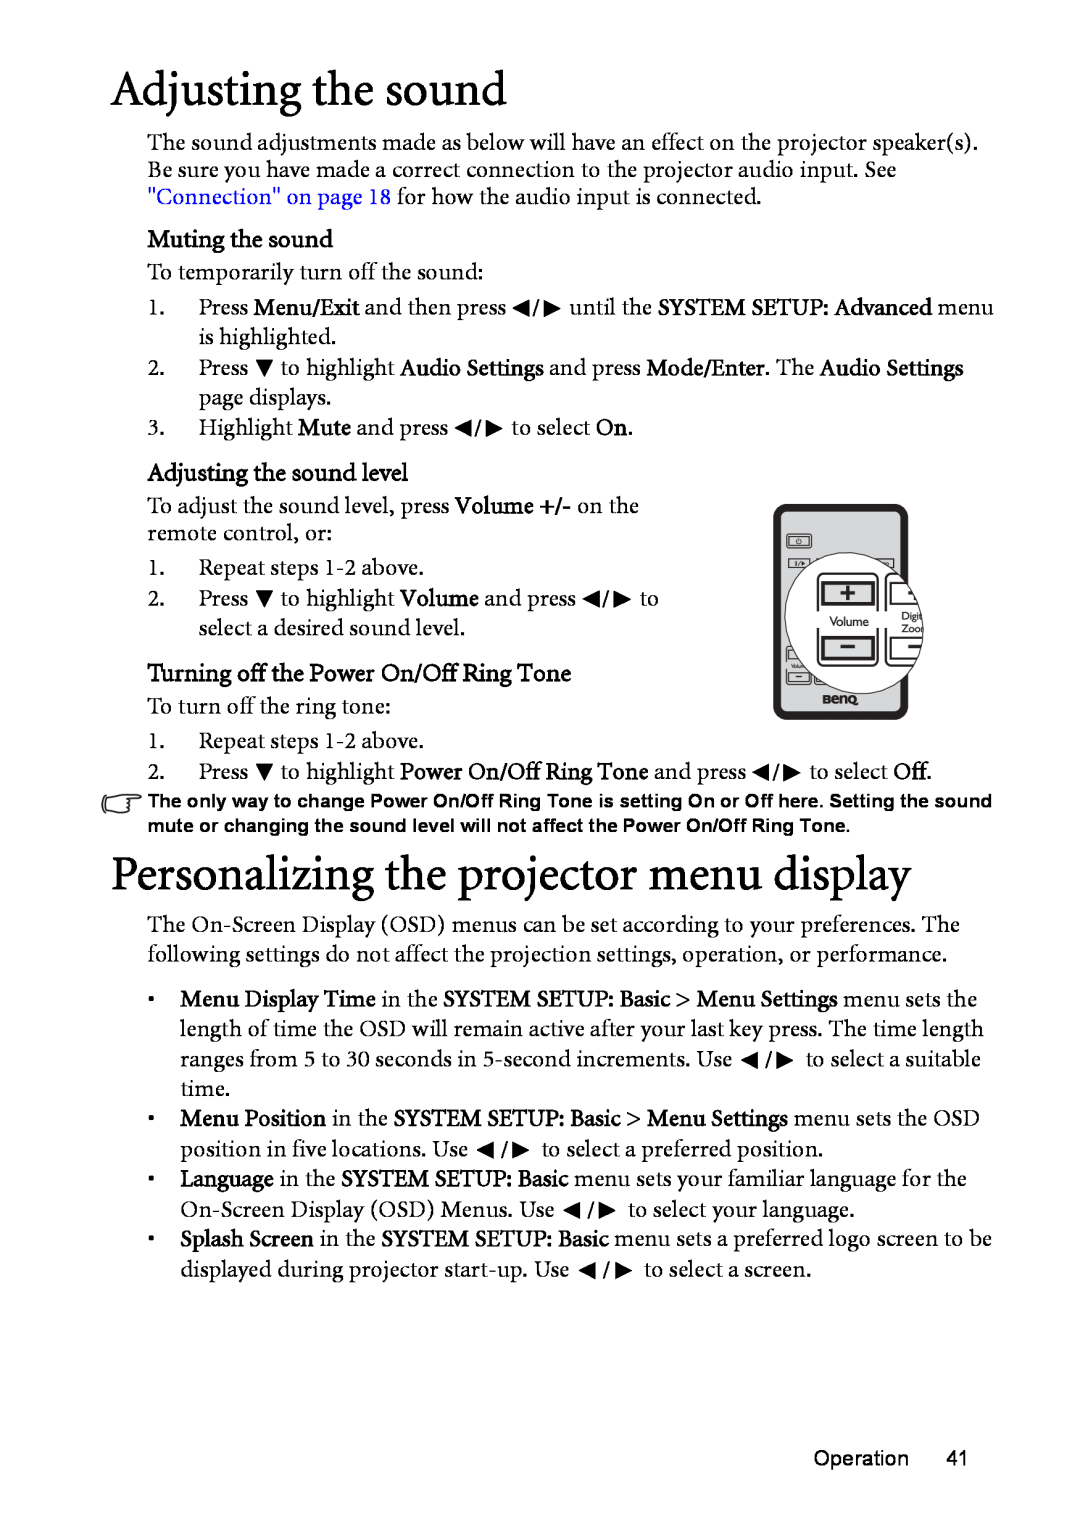 BenQ MP575, MP576, MP525, MP515 Personalizing the projector menu display, Muting the sound, Adjusting the sound level 